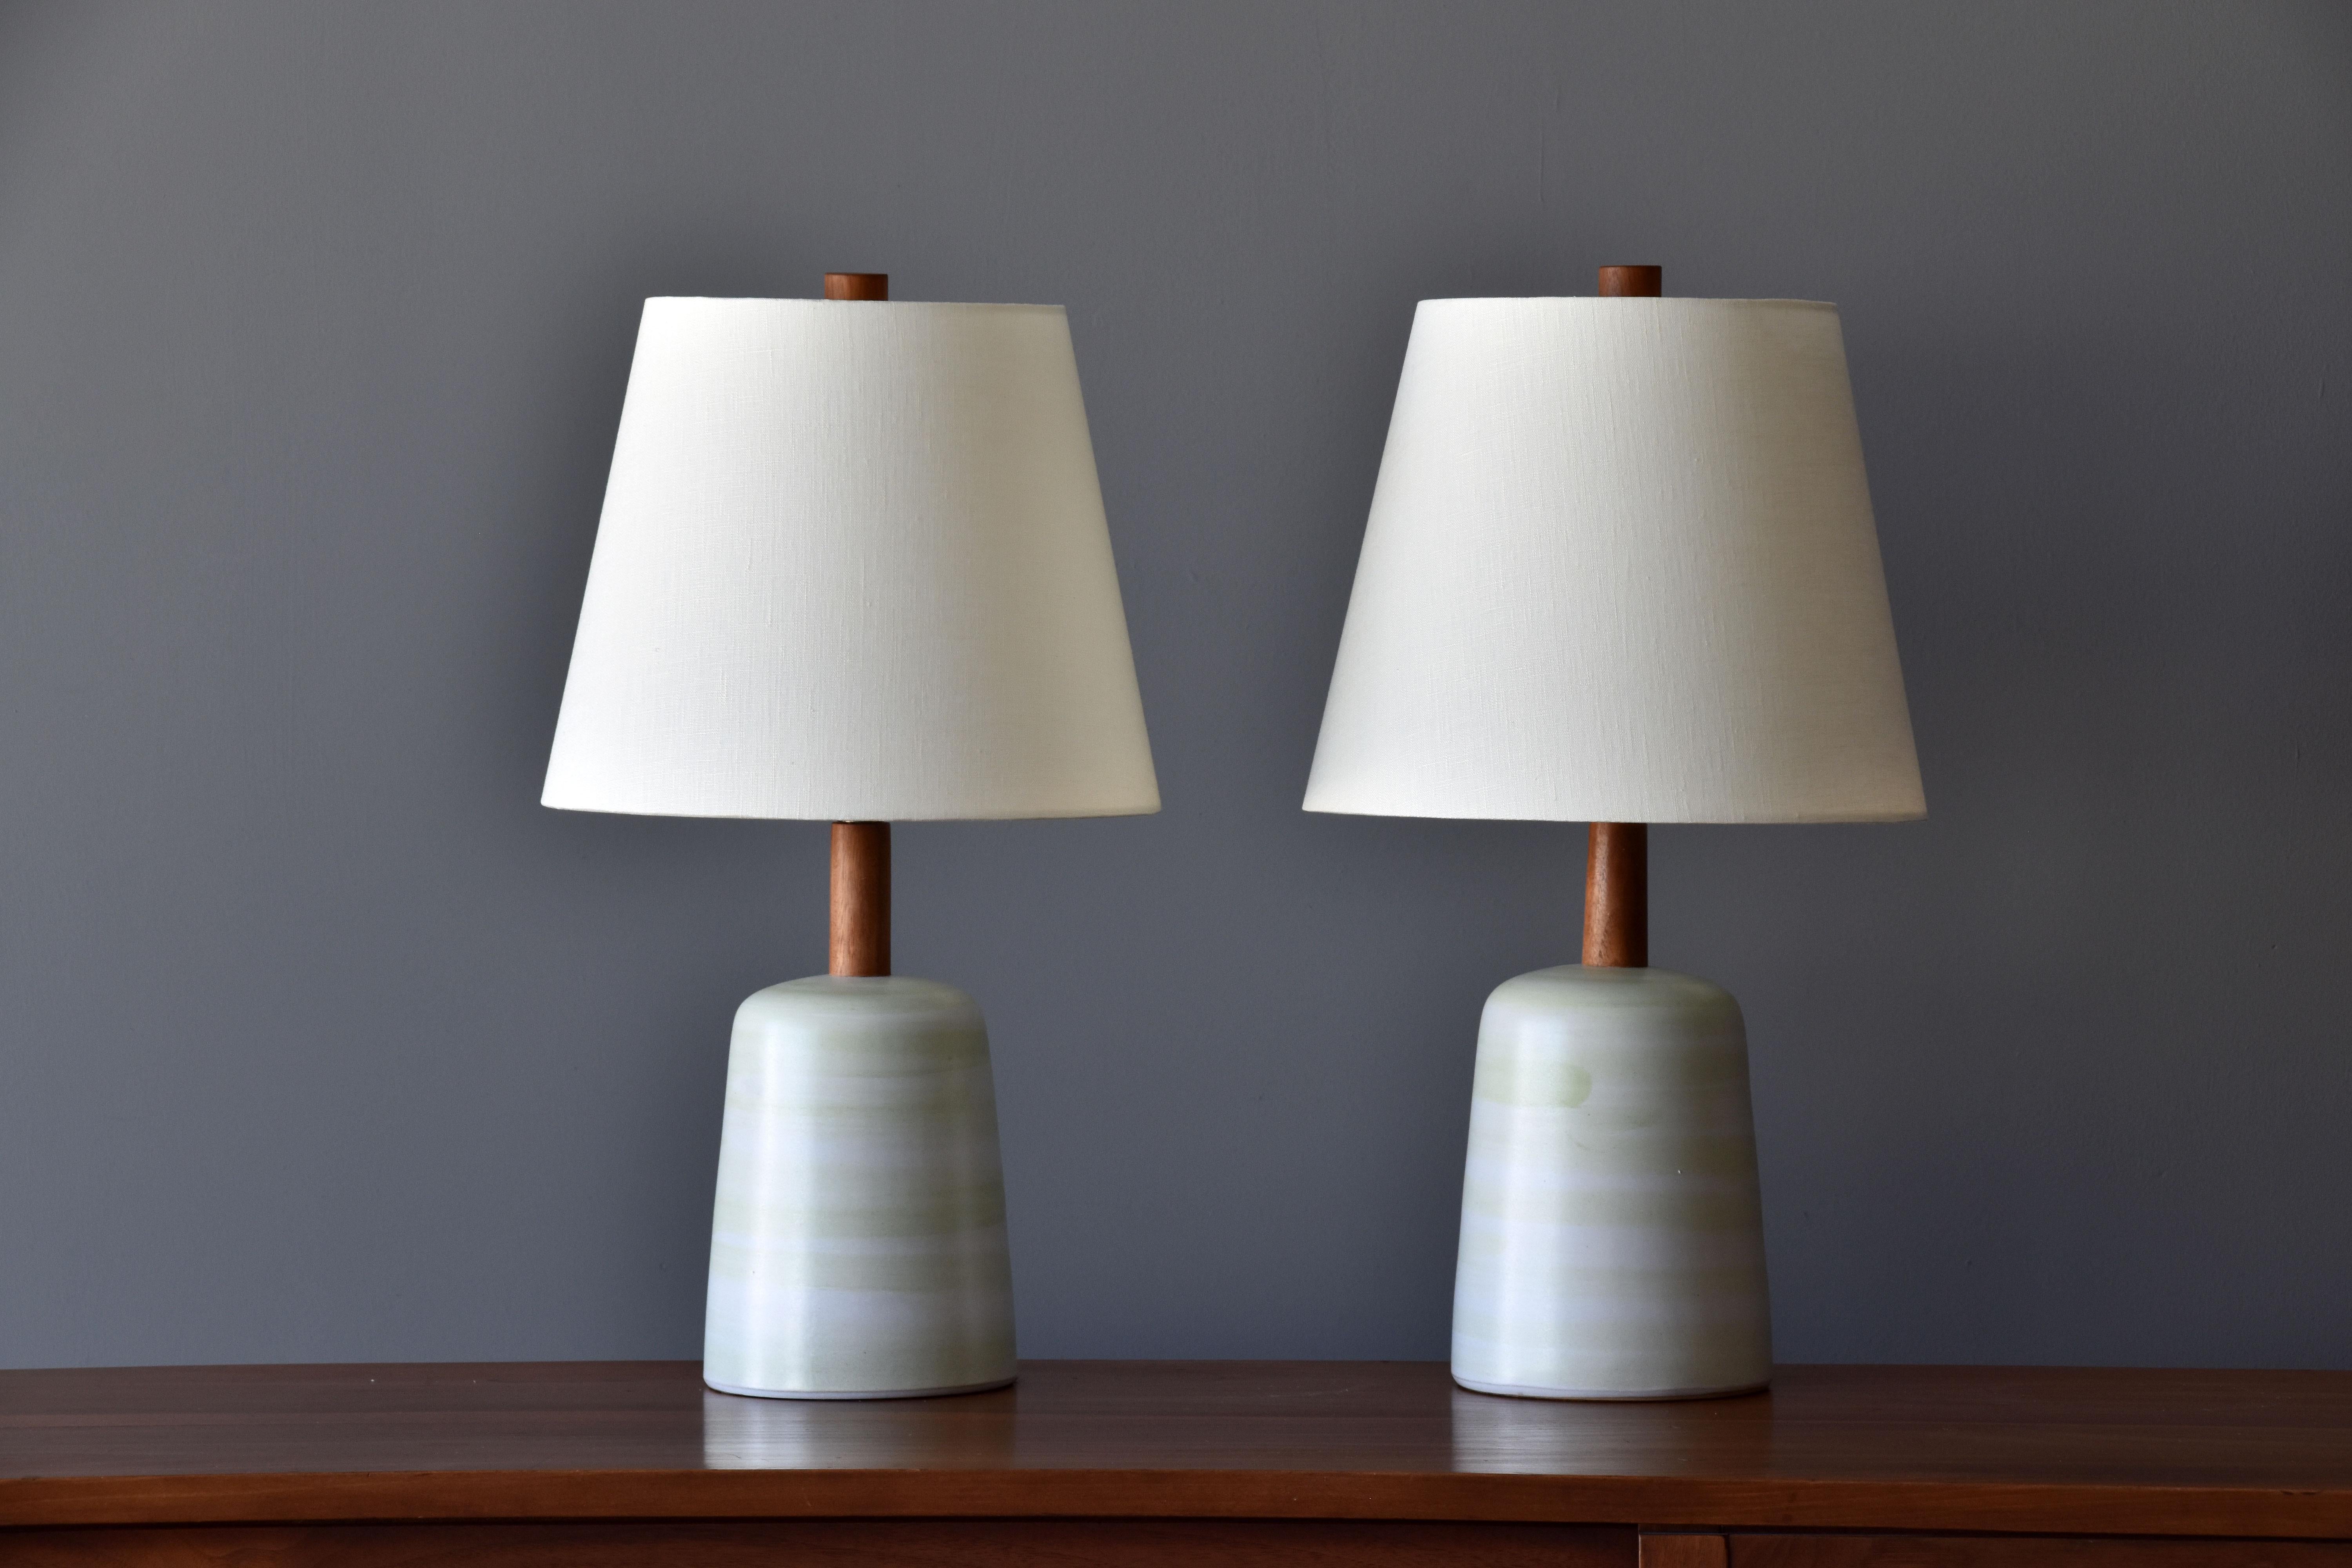 A pair of table lamps designed by husband and wife duo Jane & Gordon Martz. Produced by Marshall Studios, Indianapolis. 

Bases are slip-cast and then dipped into glaze. Design also incorporates exquisite walnut necks and finials. Bases are